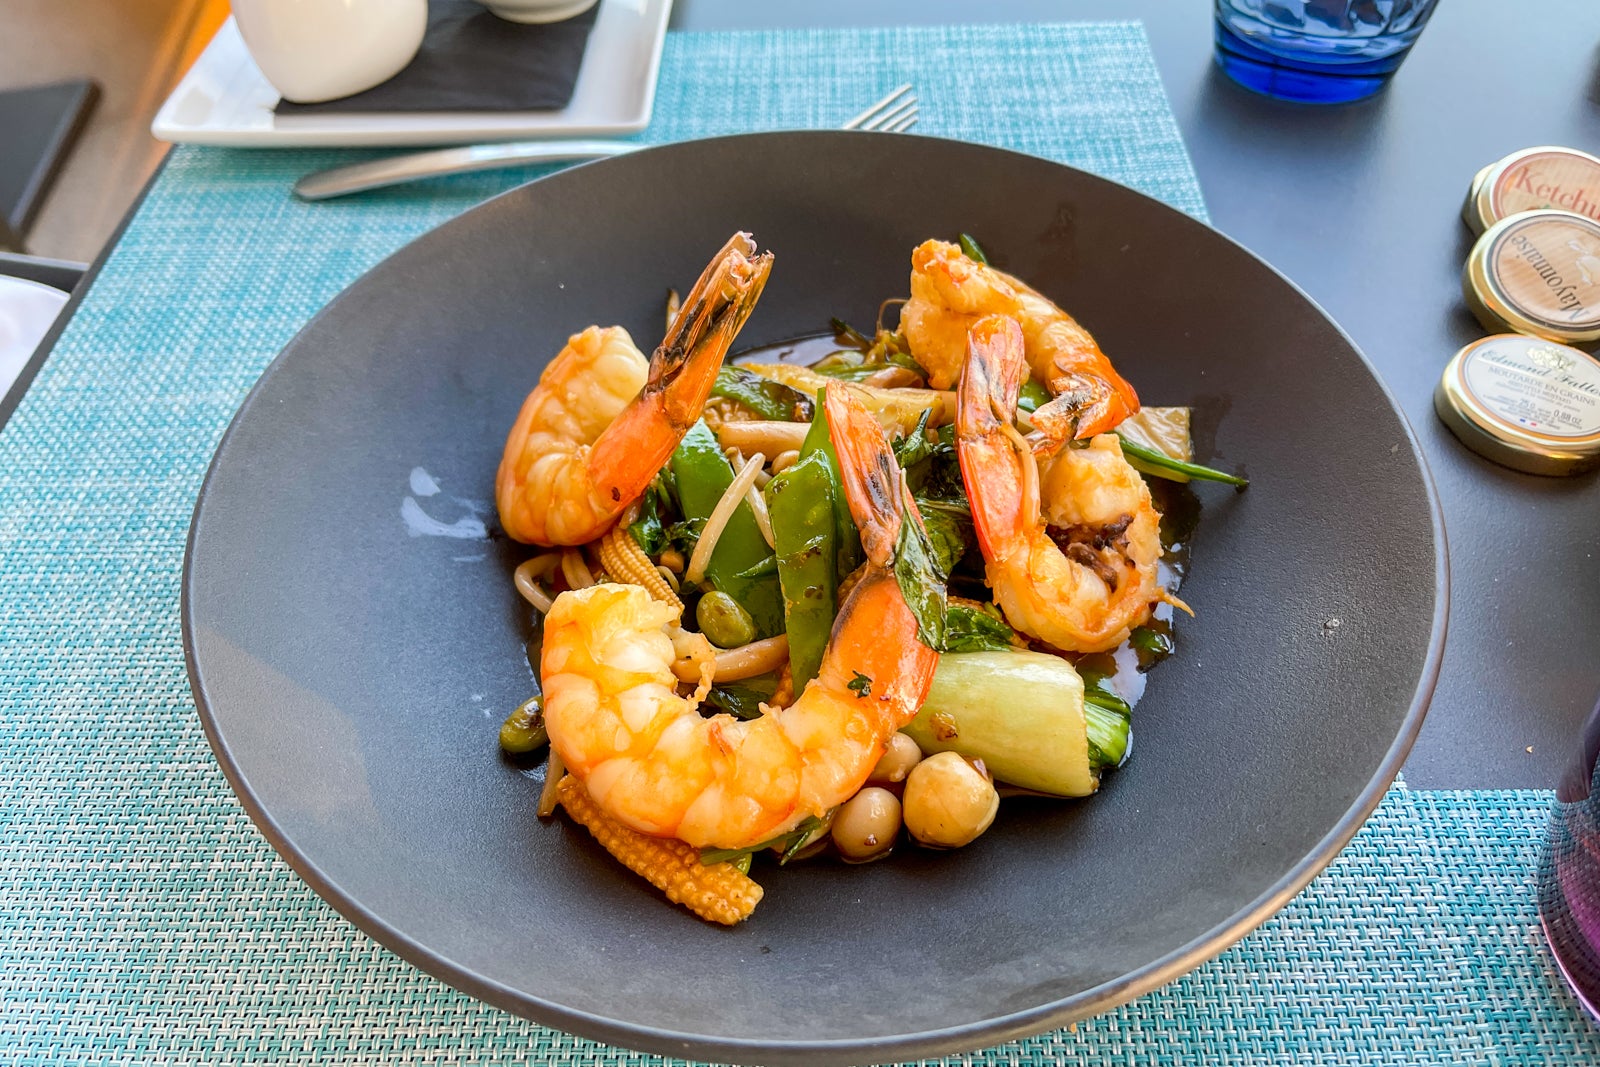 Shrimp on a plate with vegetables